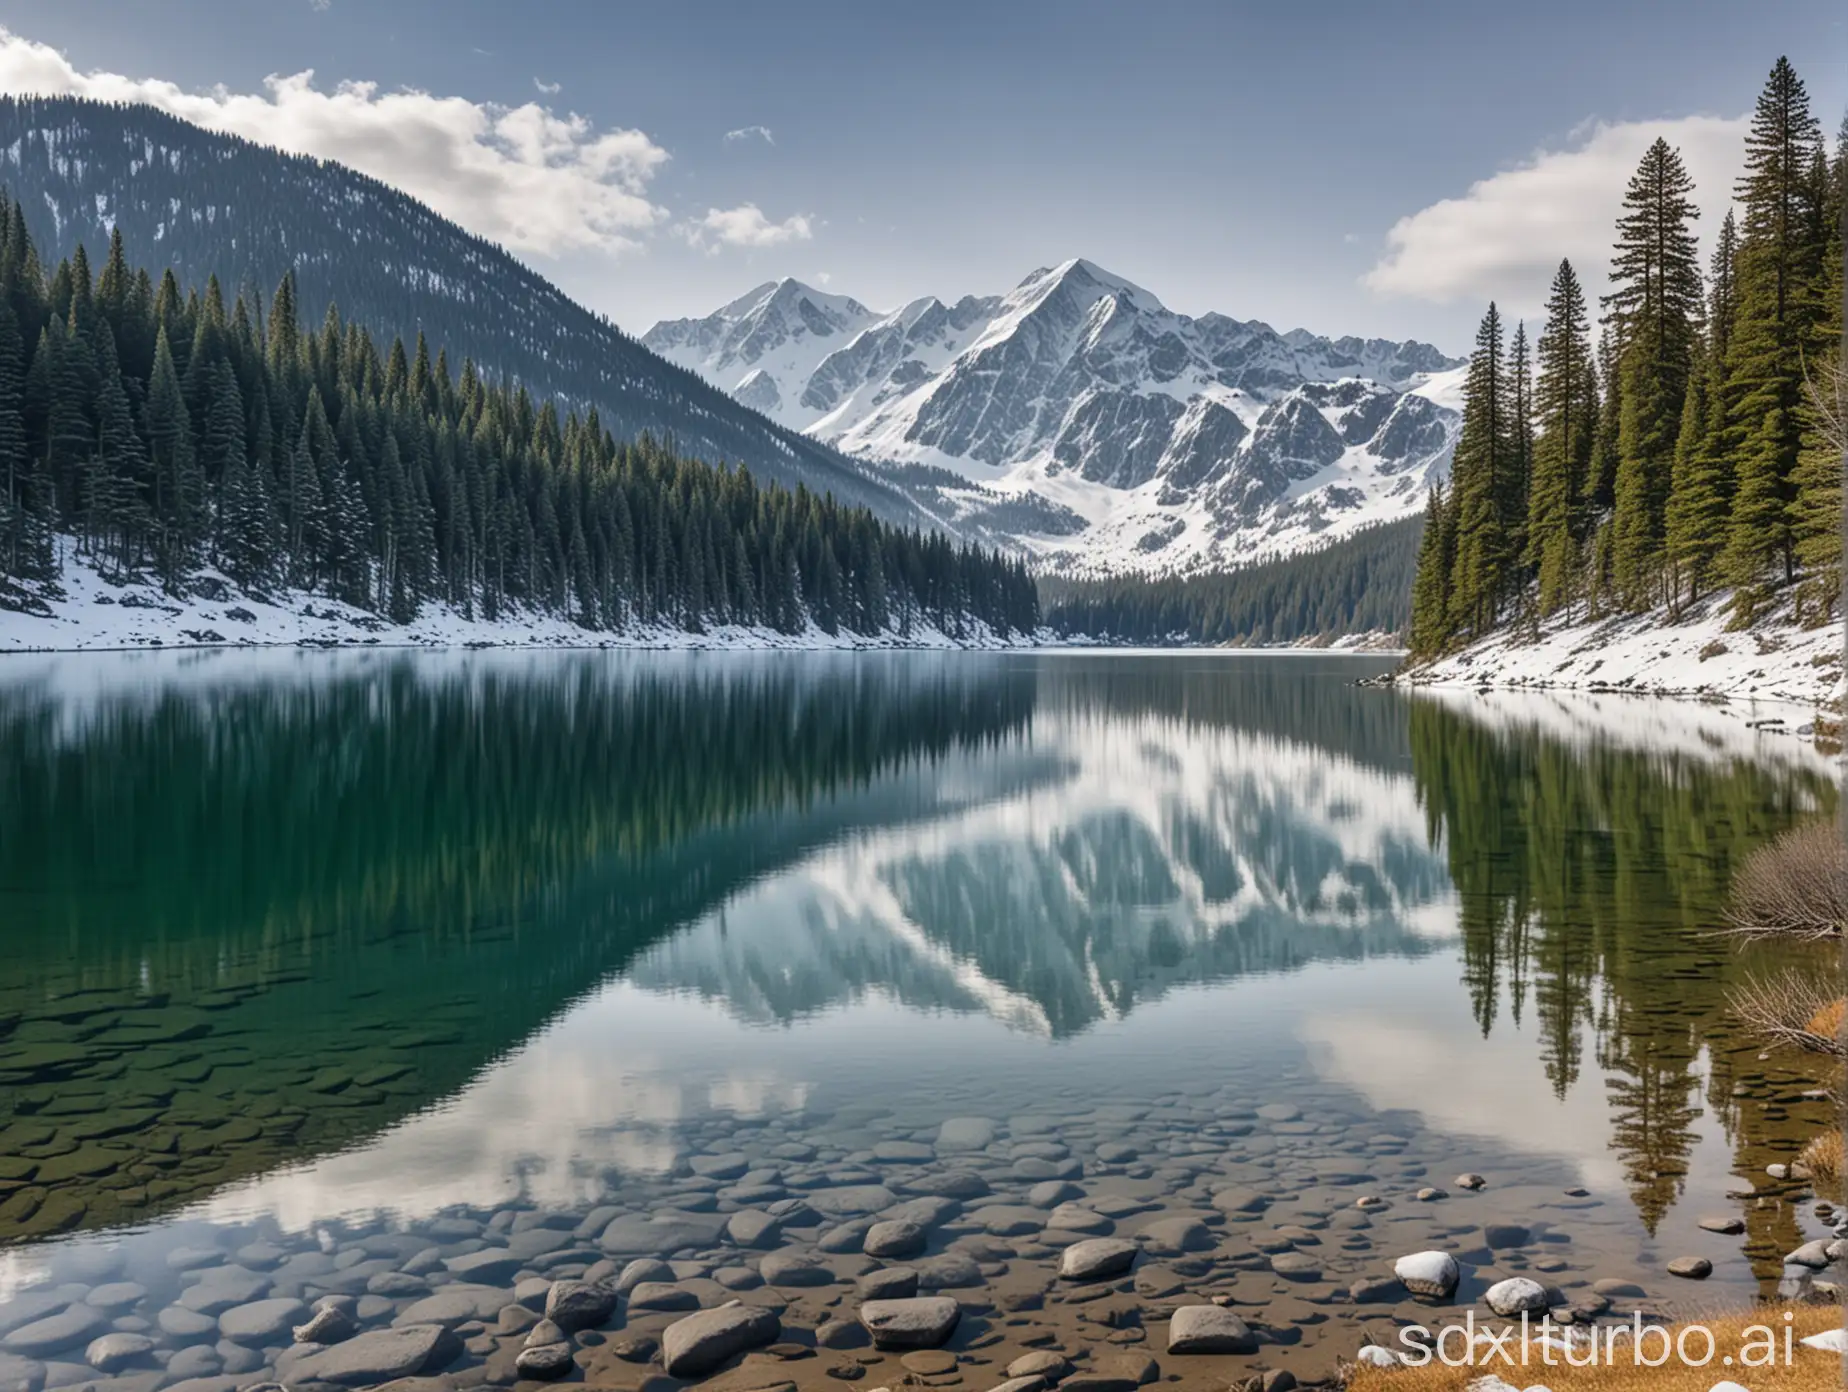 Panoramic view of a vast, serene lake surrounded by snow-capped mountains and evergreen trees.